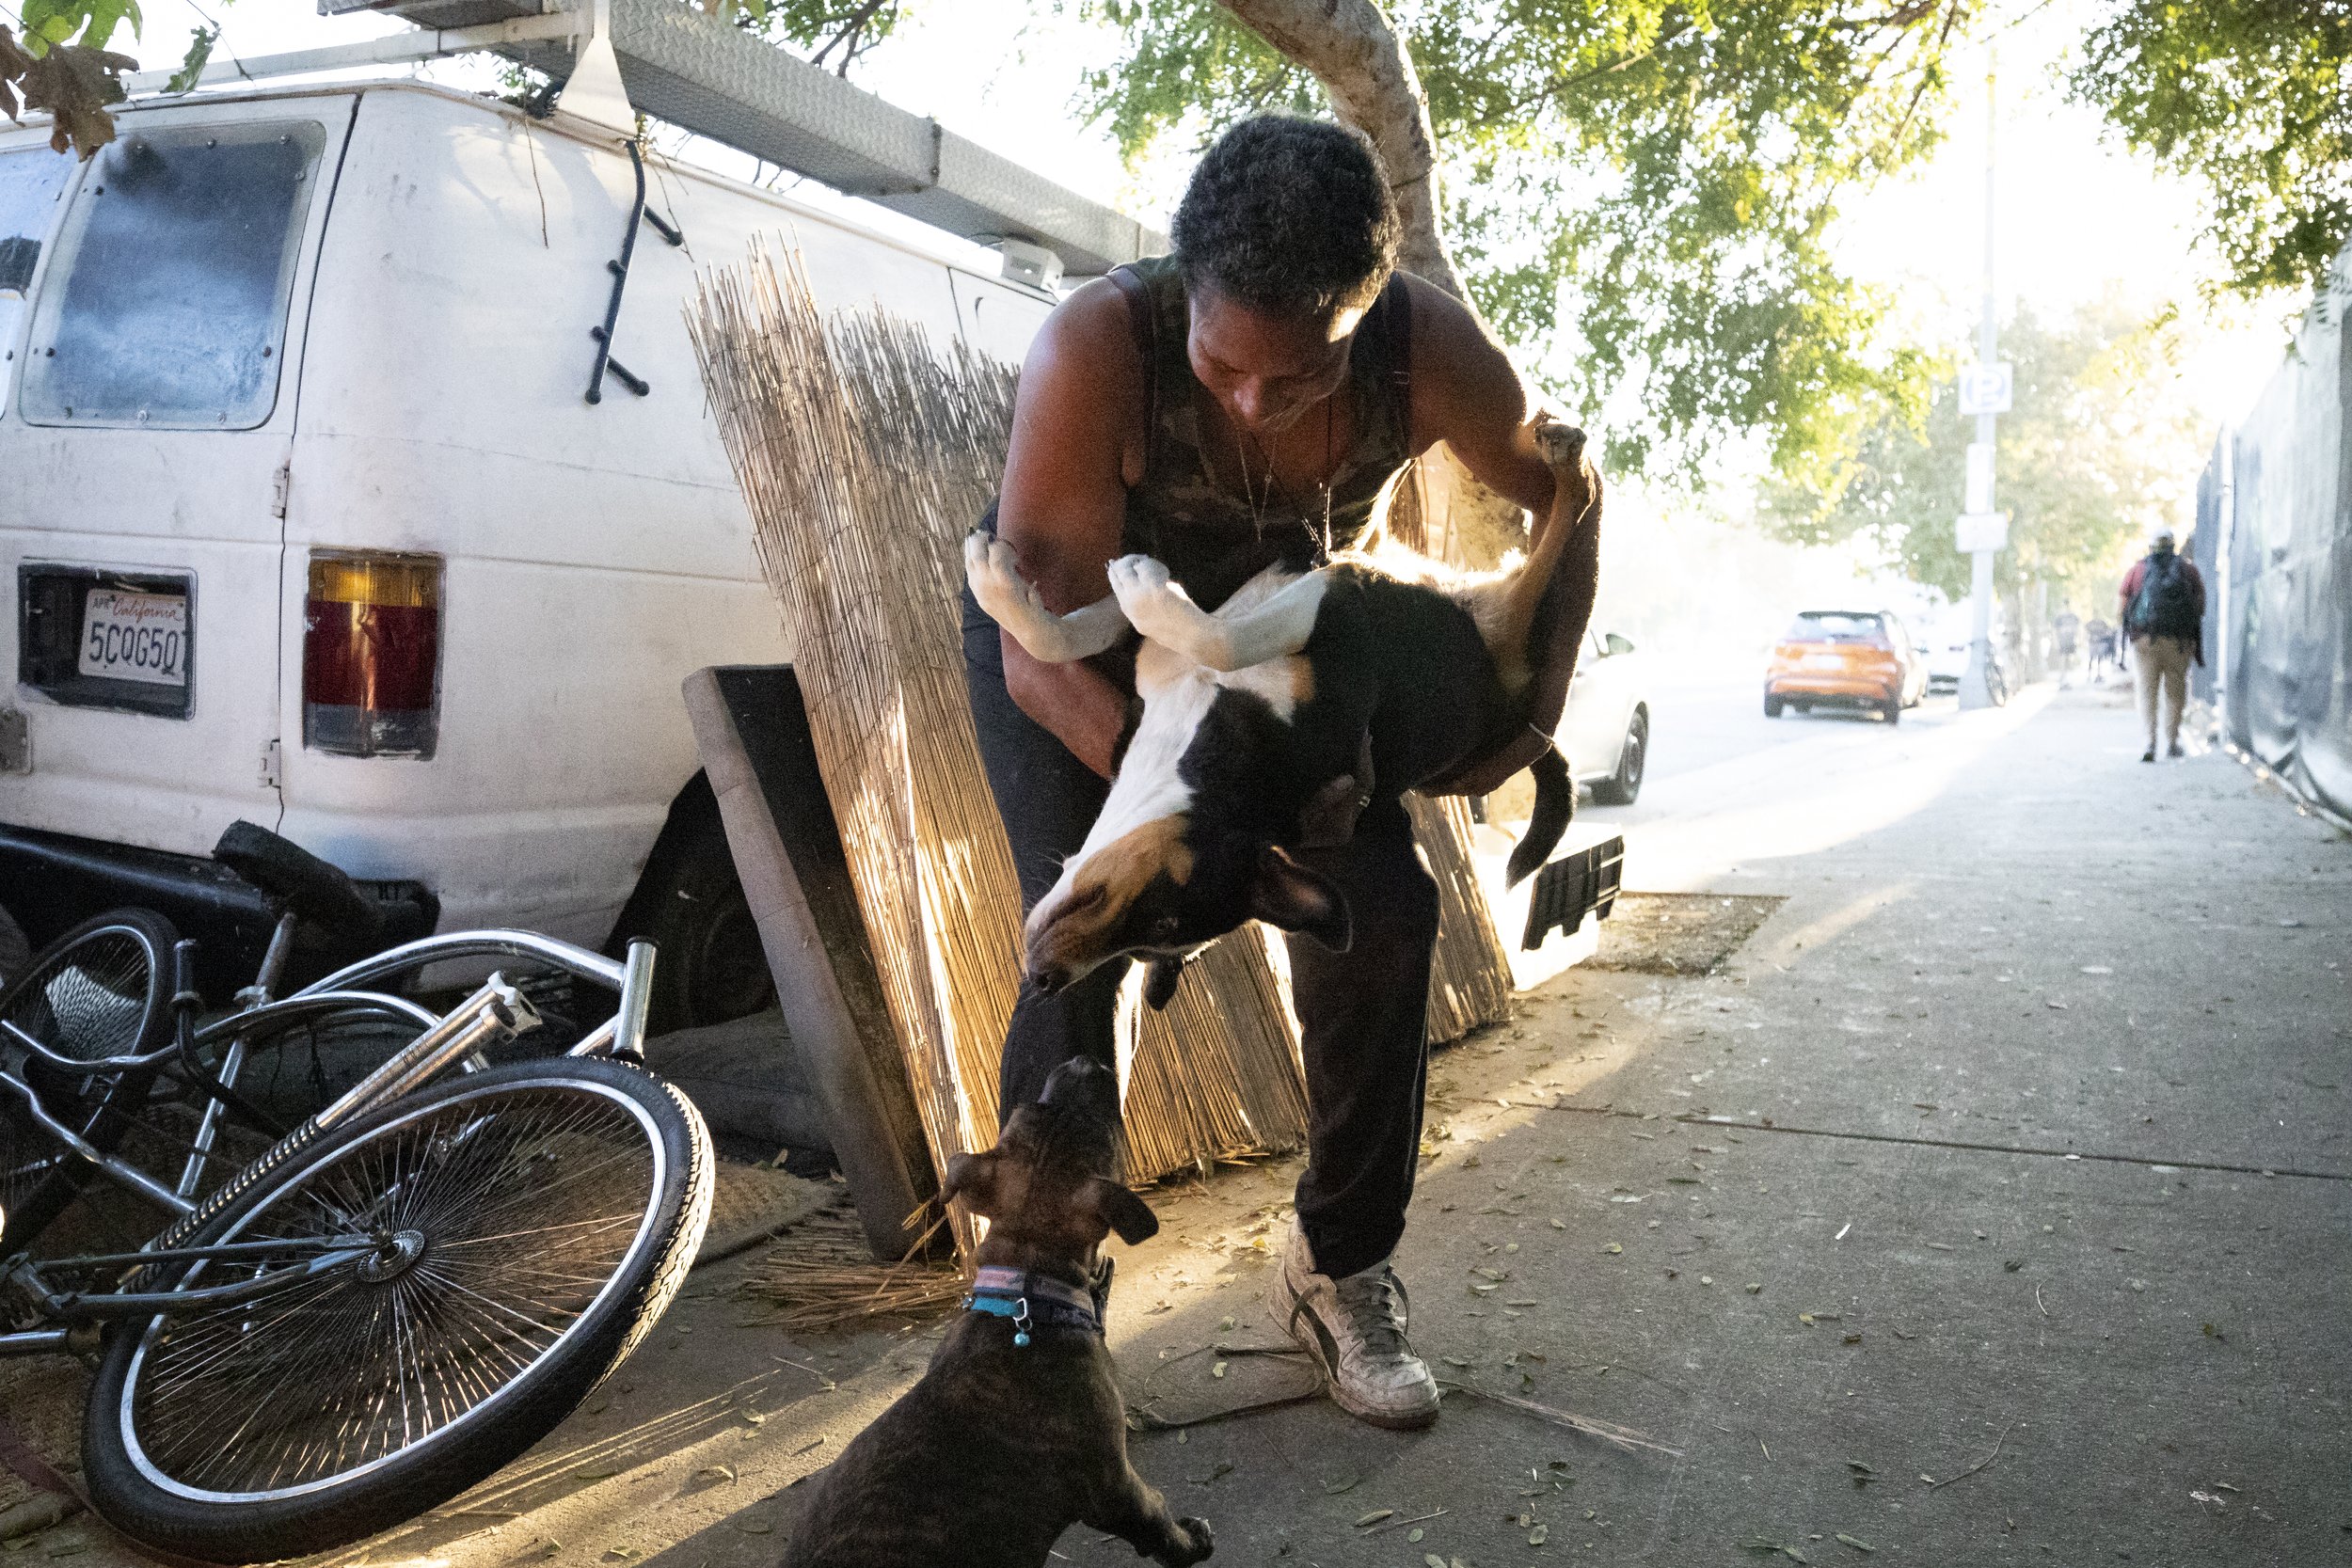  Rebecca Dannenbaum holds her dog, Google, upside down while she sniffs Dannenbaum’s new puppy, Snapchat, in near the RV she lives in on Venice Blvd. in Los Angeles, Calif., on Nov. 5, 2023. (Caylo Seals | The Corsair) 